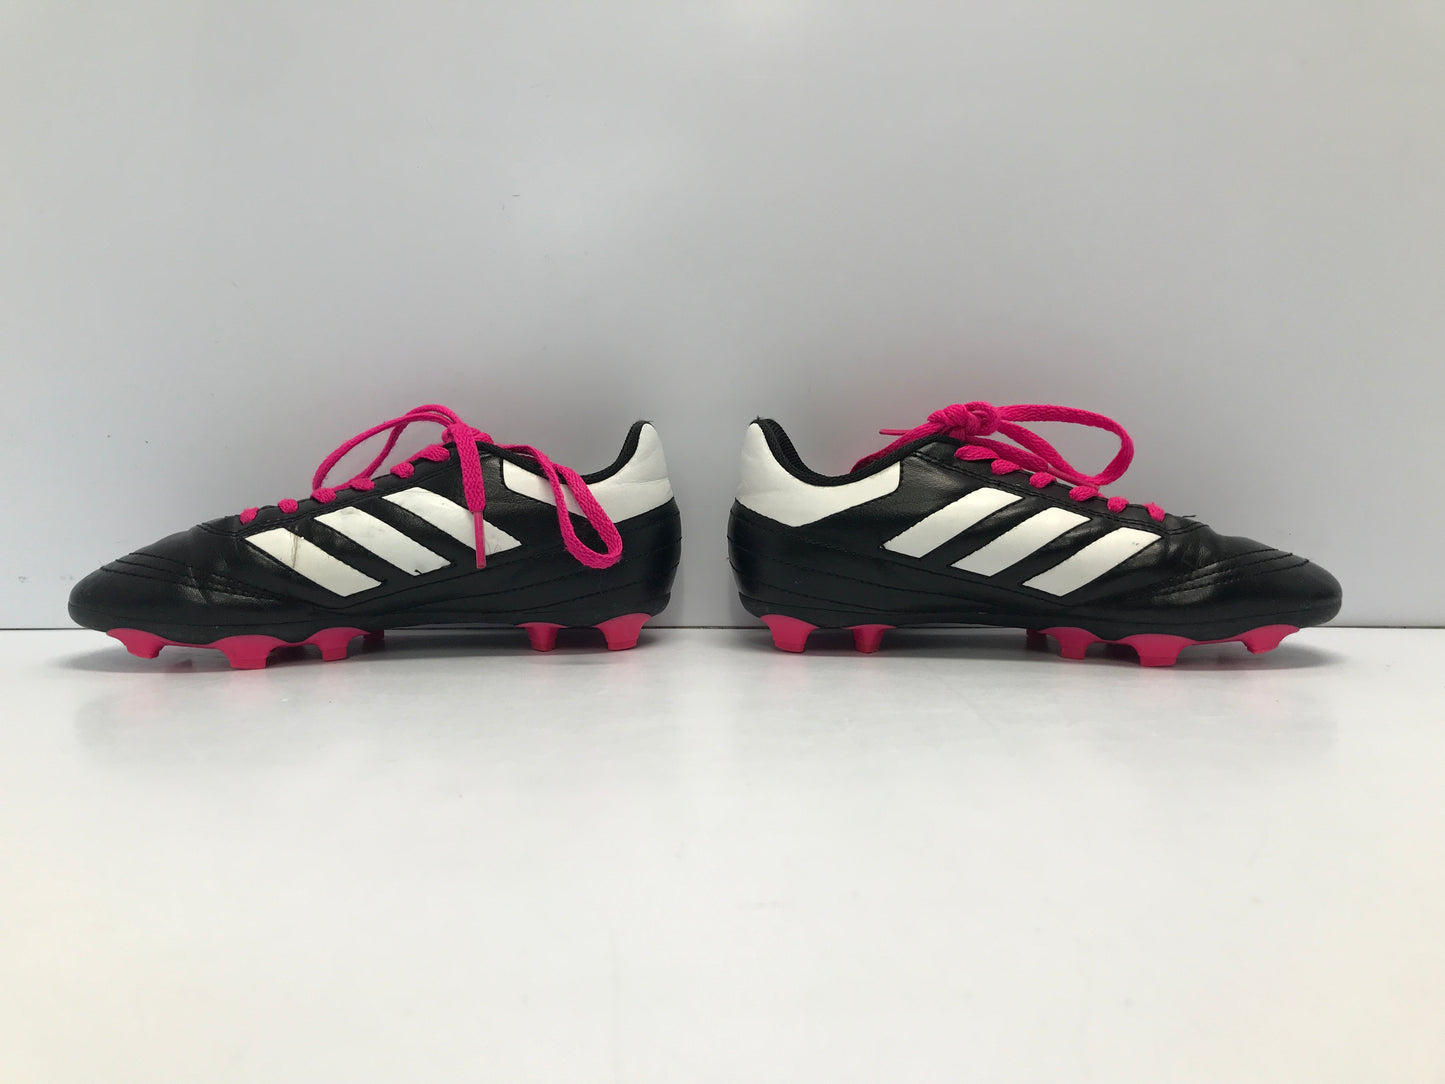 Soccer Shoes Cleats Child Size 2 Adidas Black Pink Excellent